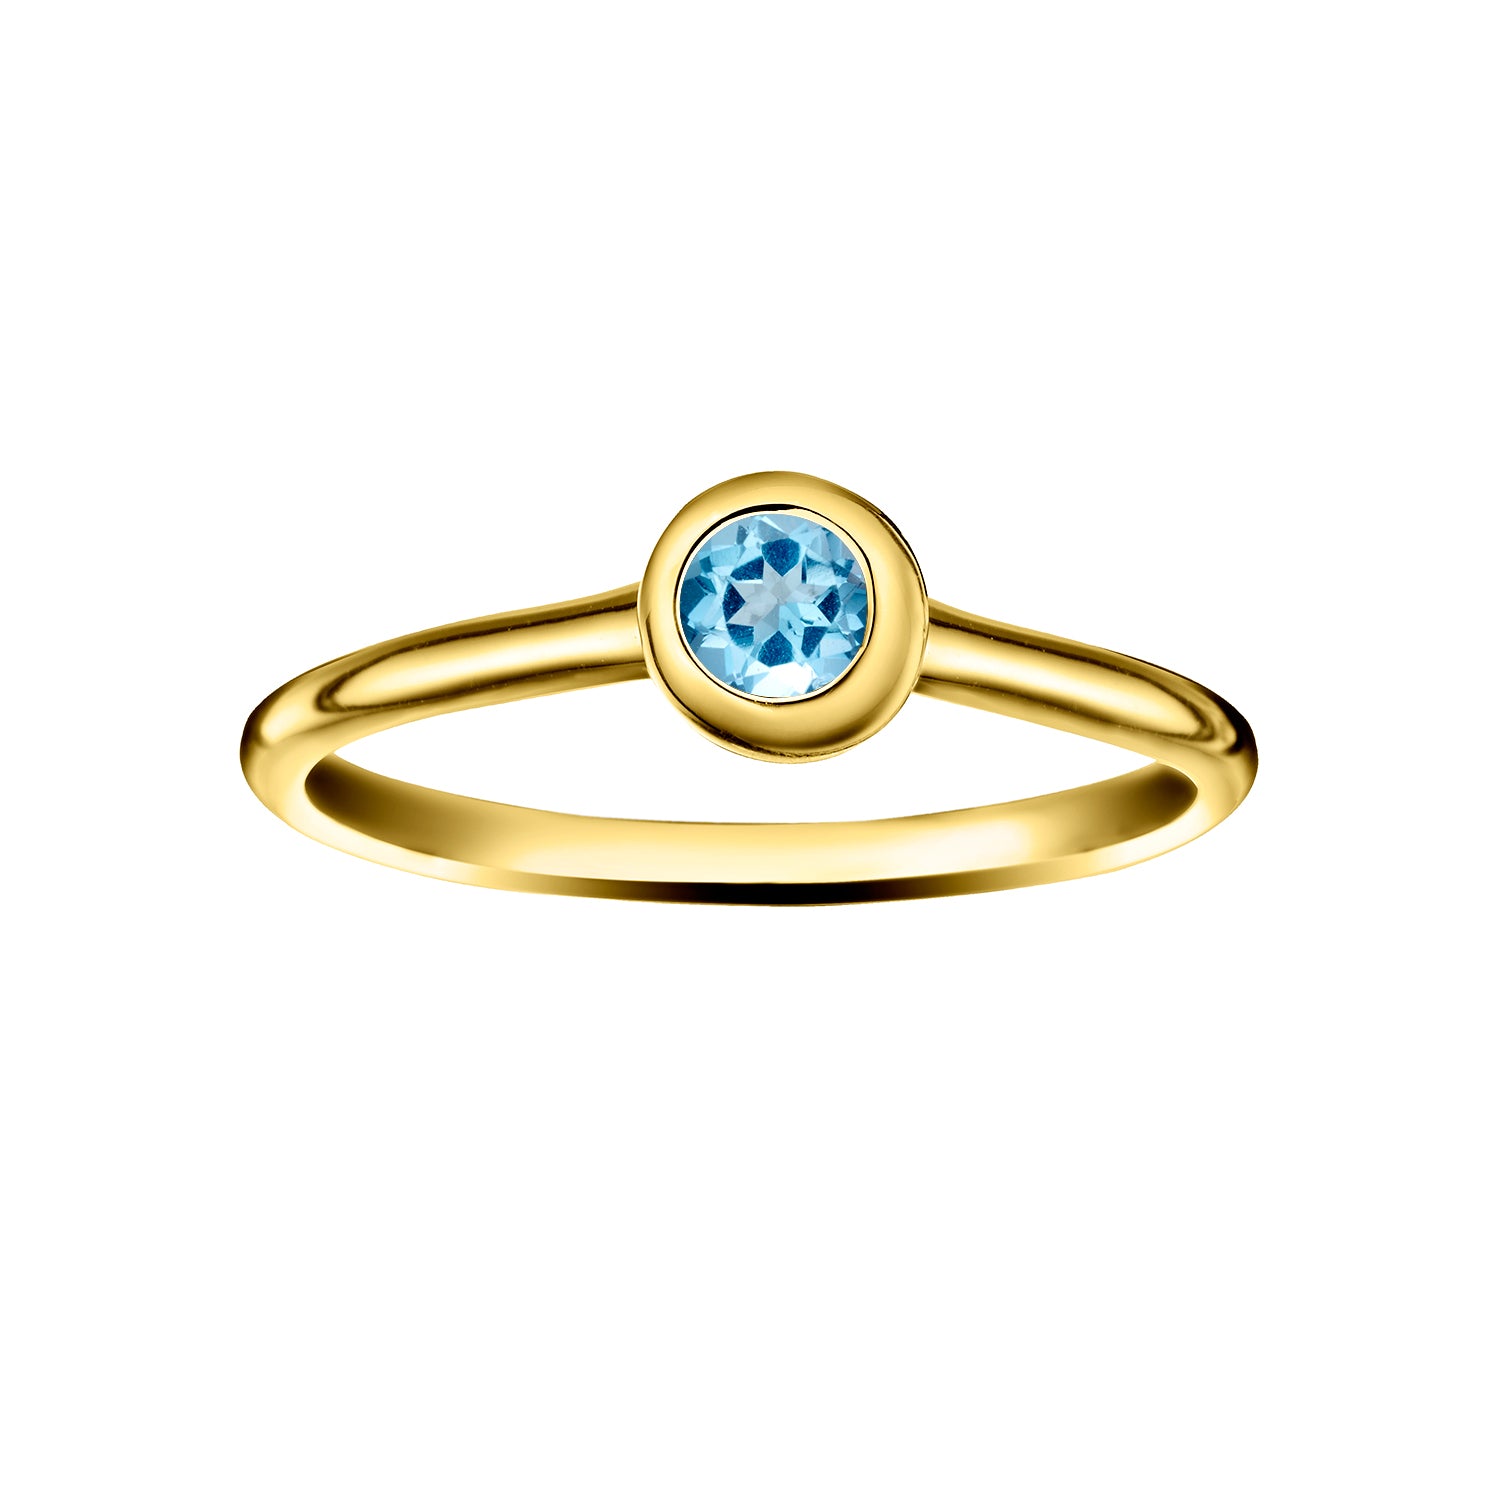 Polished Gold Vermeil Crescent Moon Stacking Birthstone Rings - December / Blue Topaz